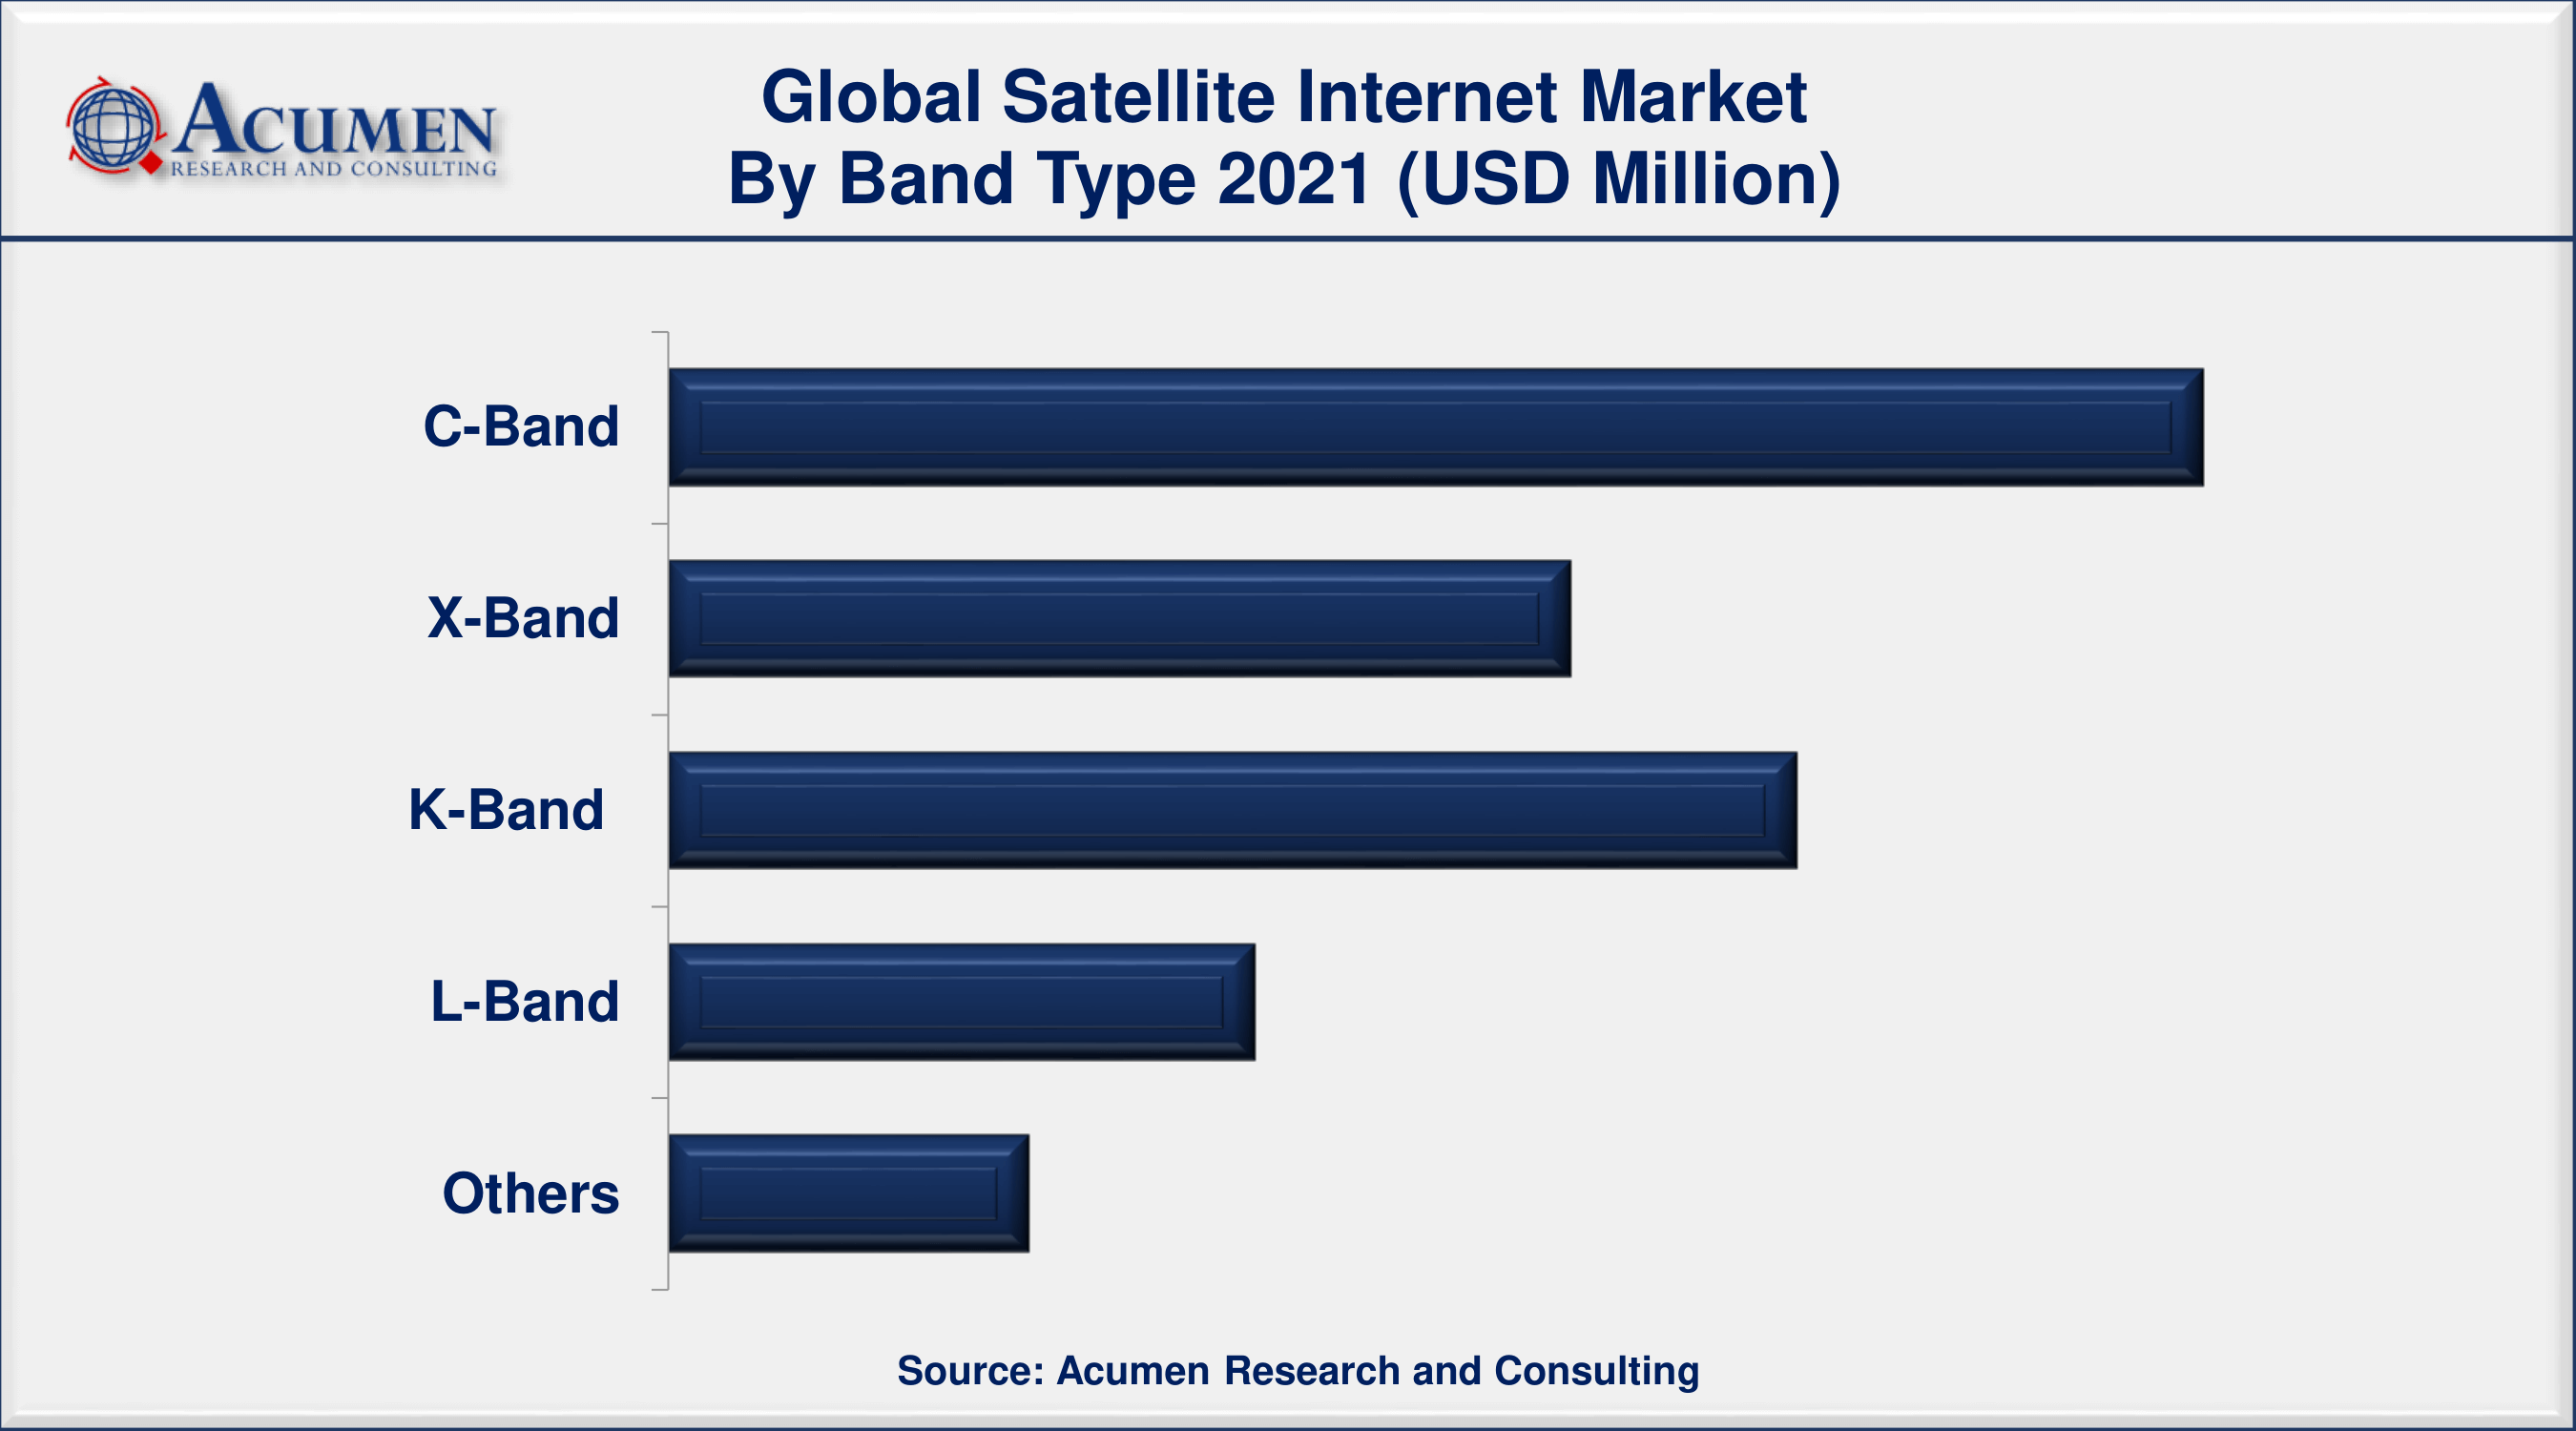 Global satellite internet market revenue is projected to expand by USD 17,431 million by 2030, with a 18.2% CAGR from 2022 to 2030.